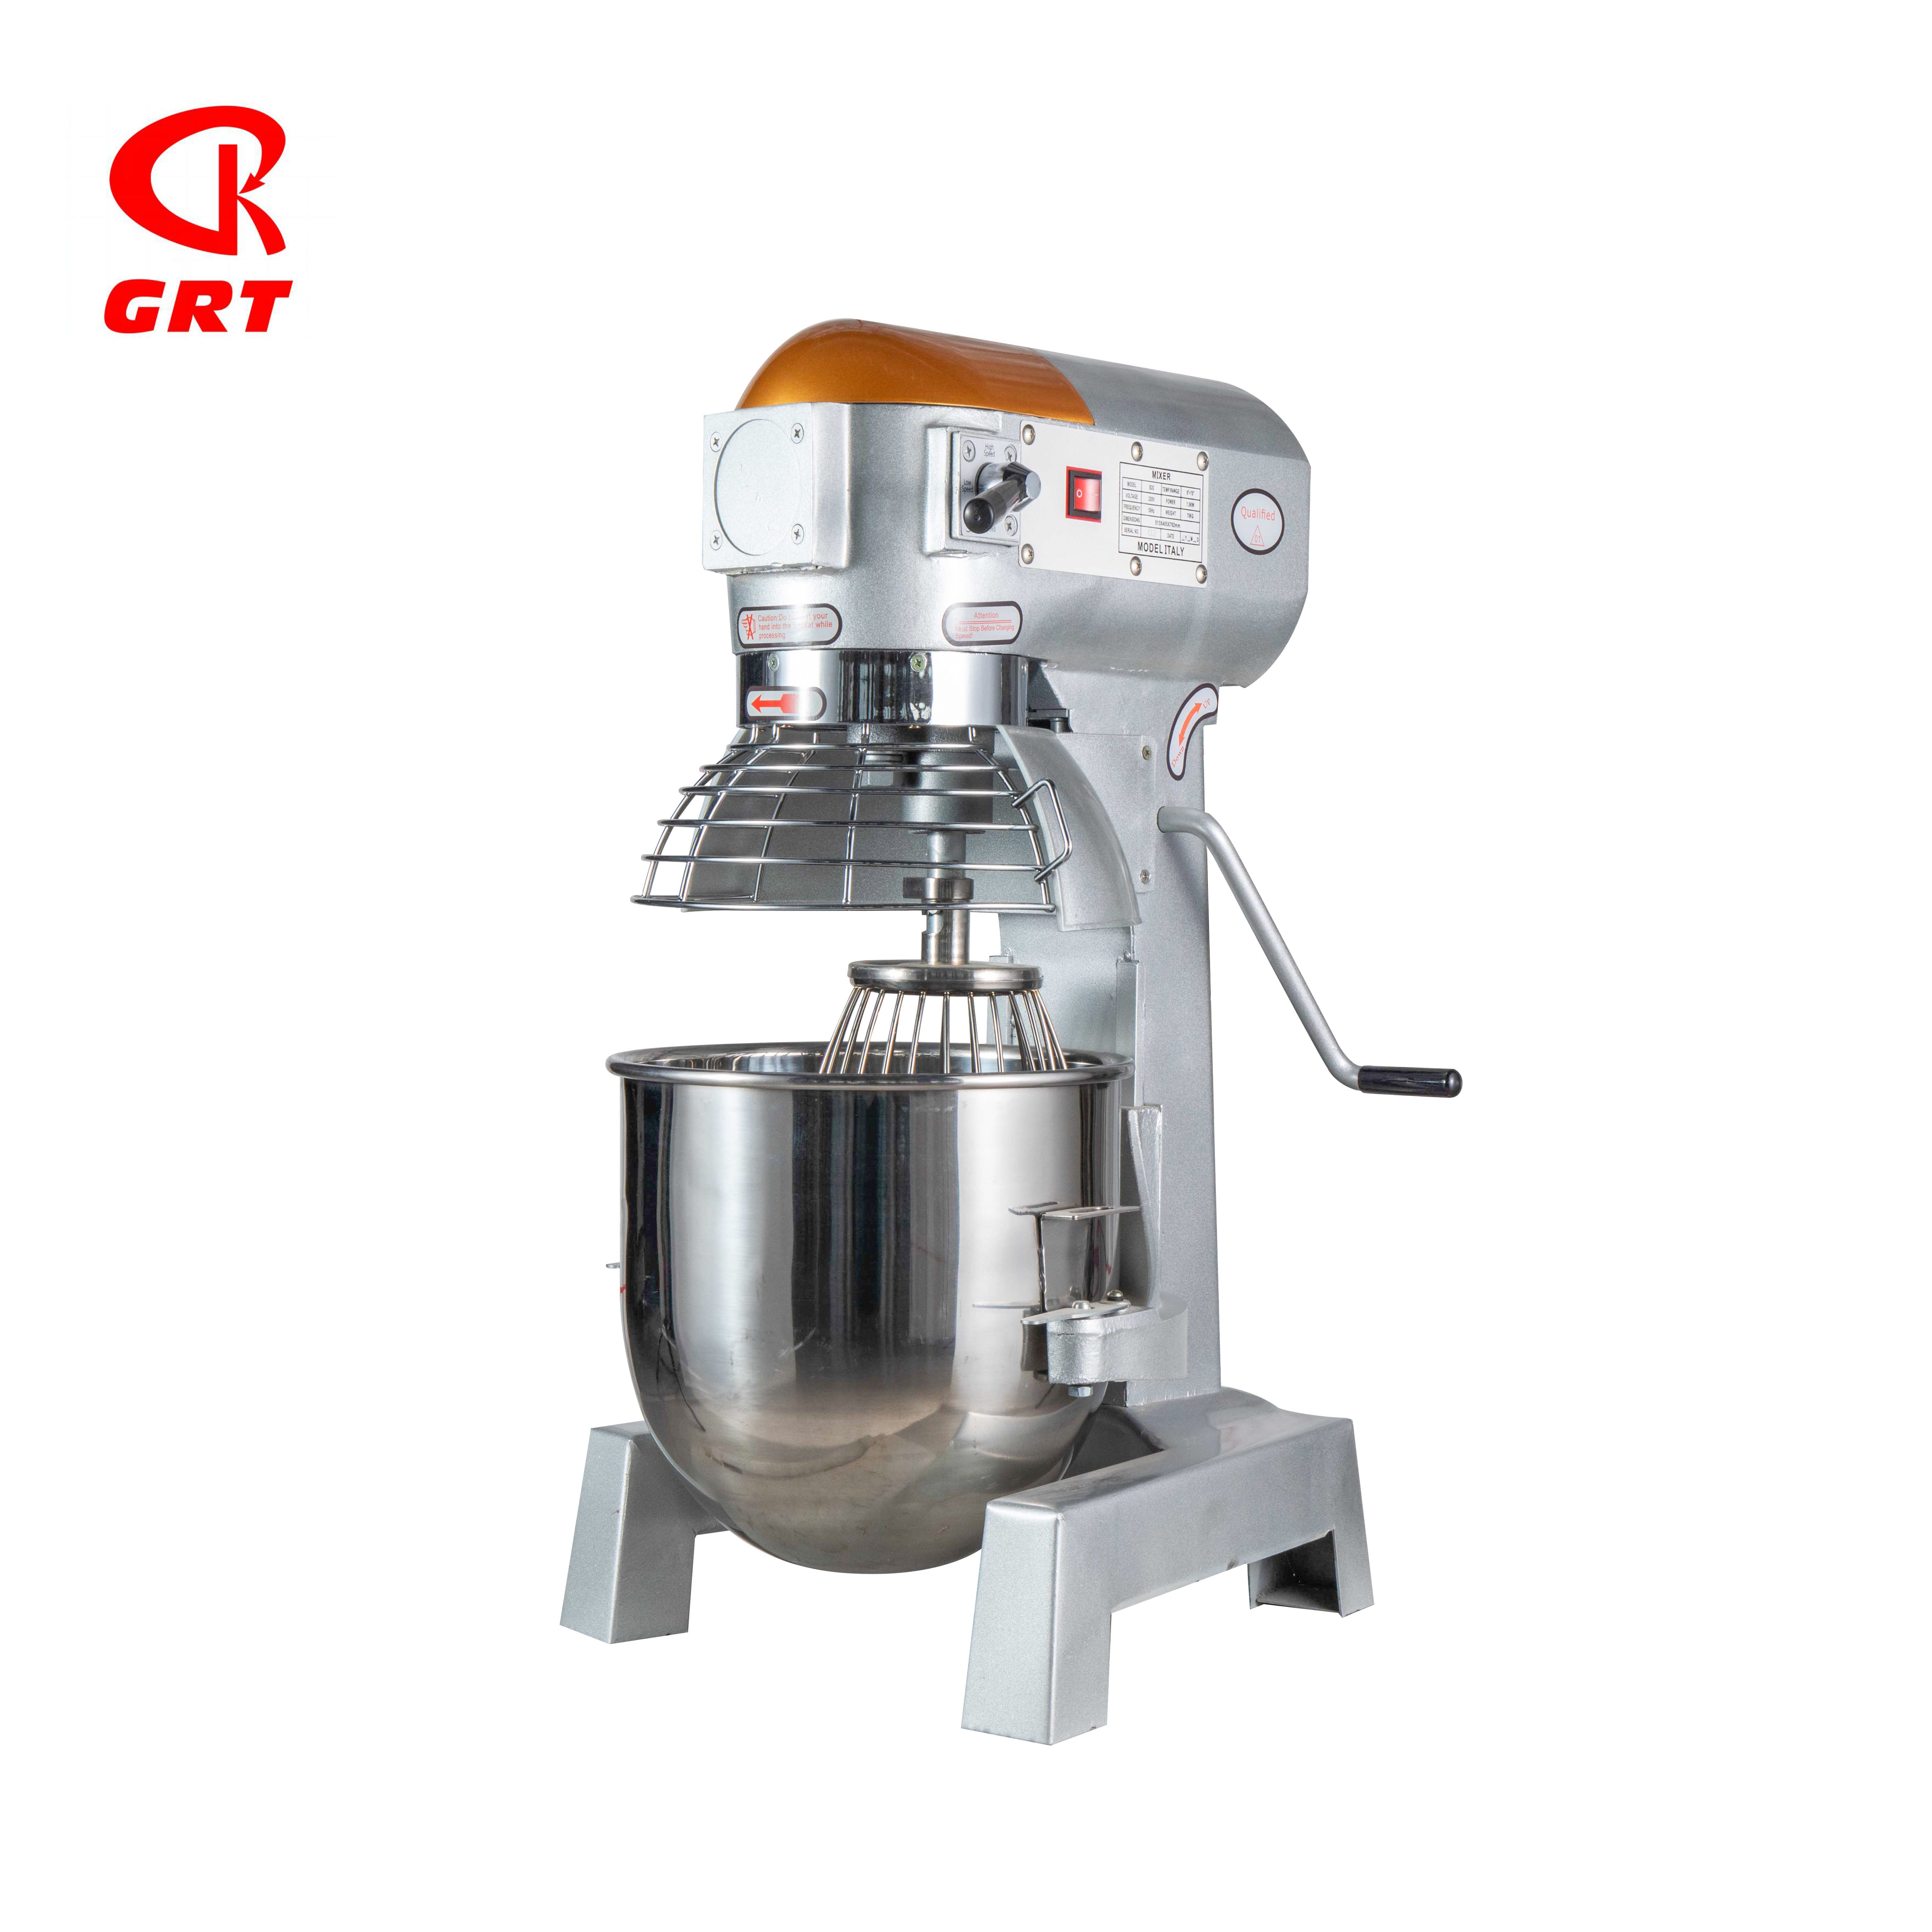 GRT-B20S Commercial Planetary Stand Mixer Planetary Food Mixer 20 Litre